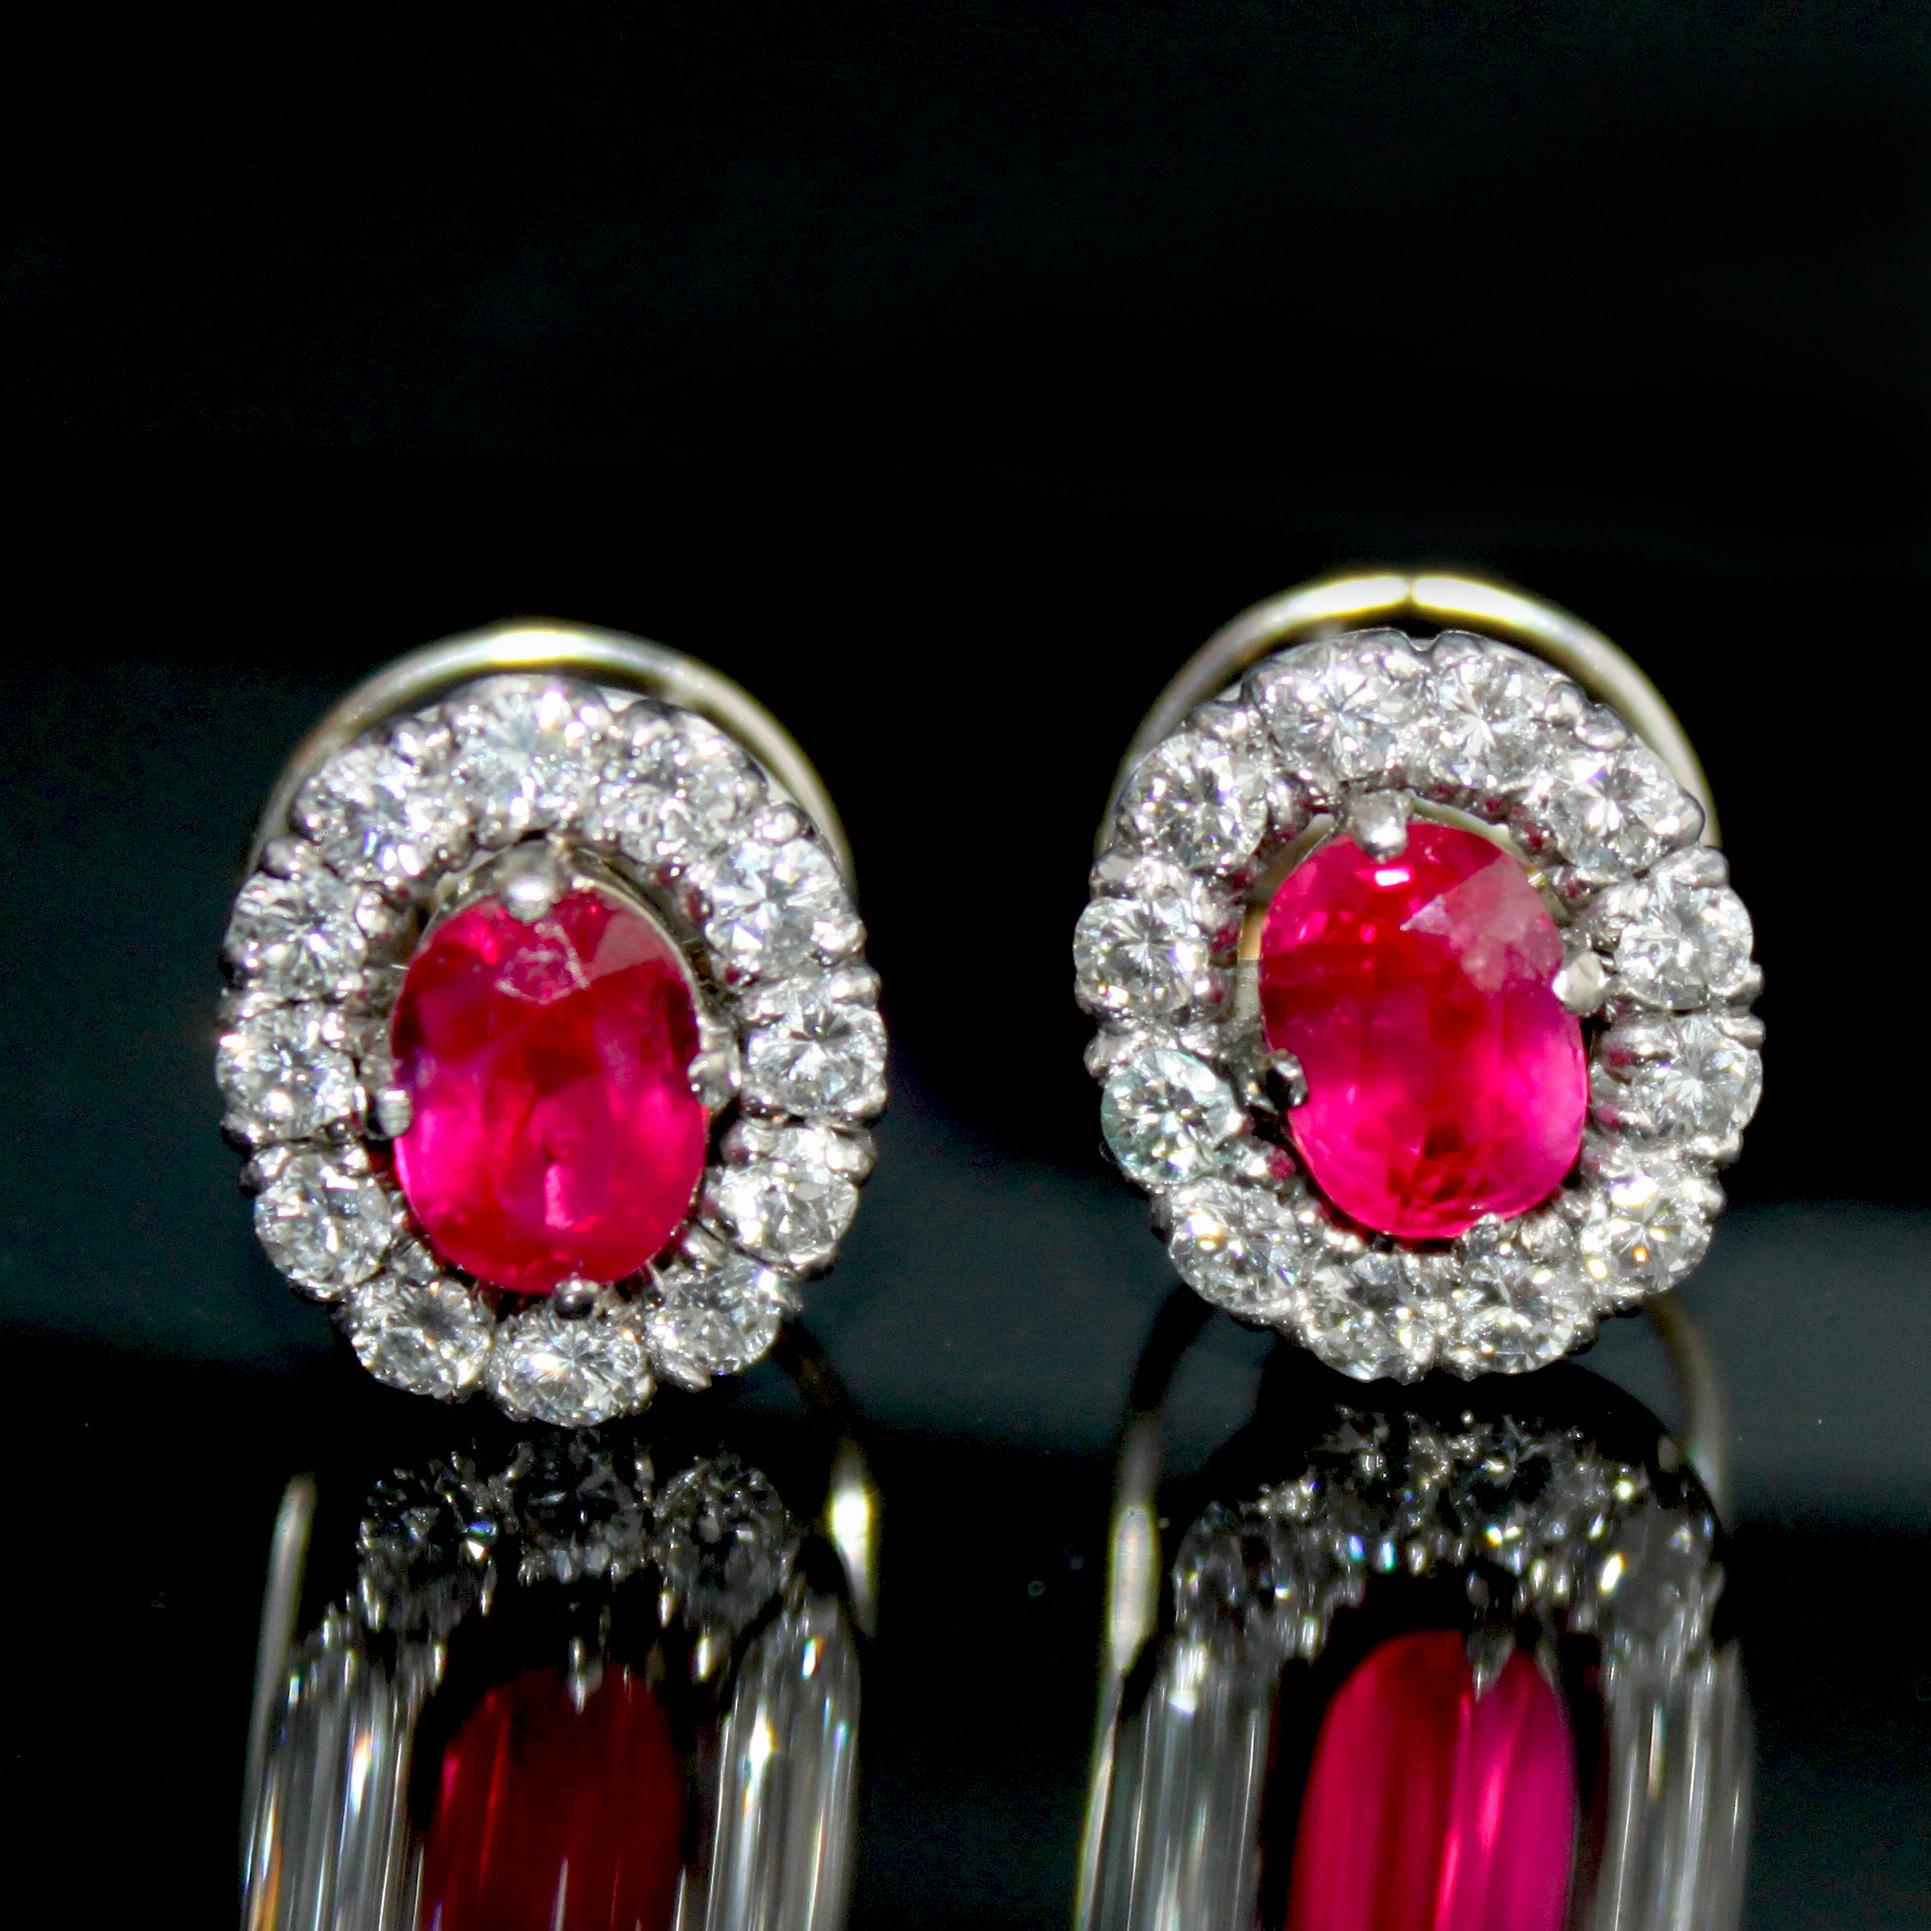 A pair of earstuds with rubies and diamonds. The rubies are of Burmese (Myanmar) origin and are natural (not heated) gemstones - accompanied by a gemological certificate by SSEF. Both rubies are cushion shaped and very well matched with a deep